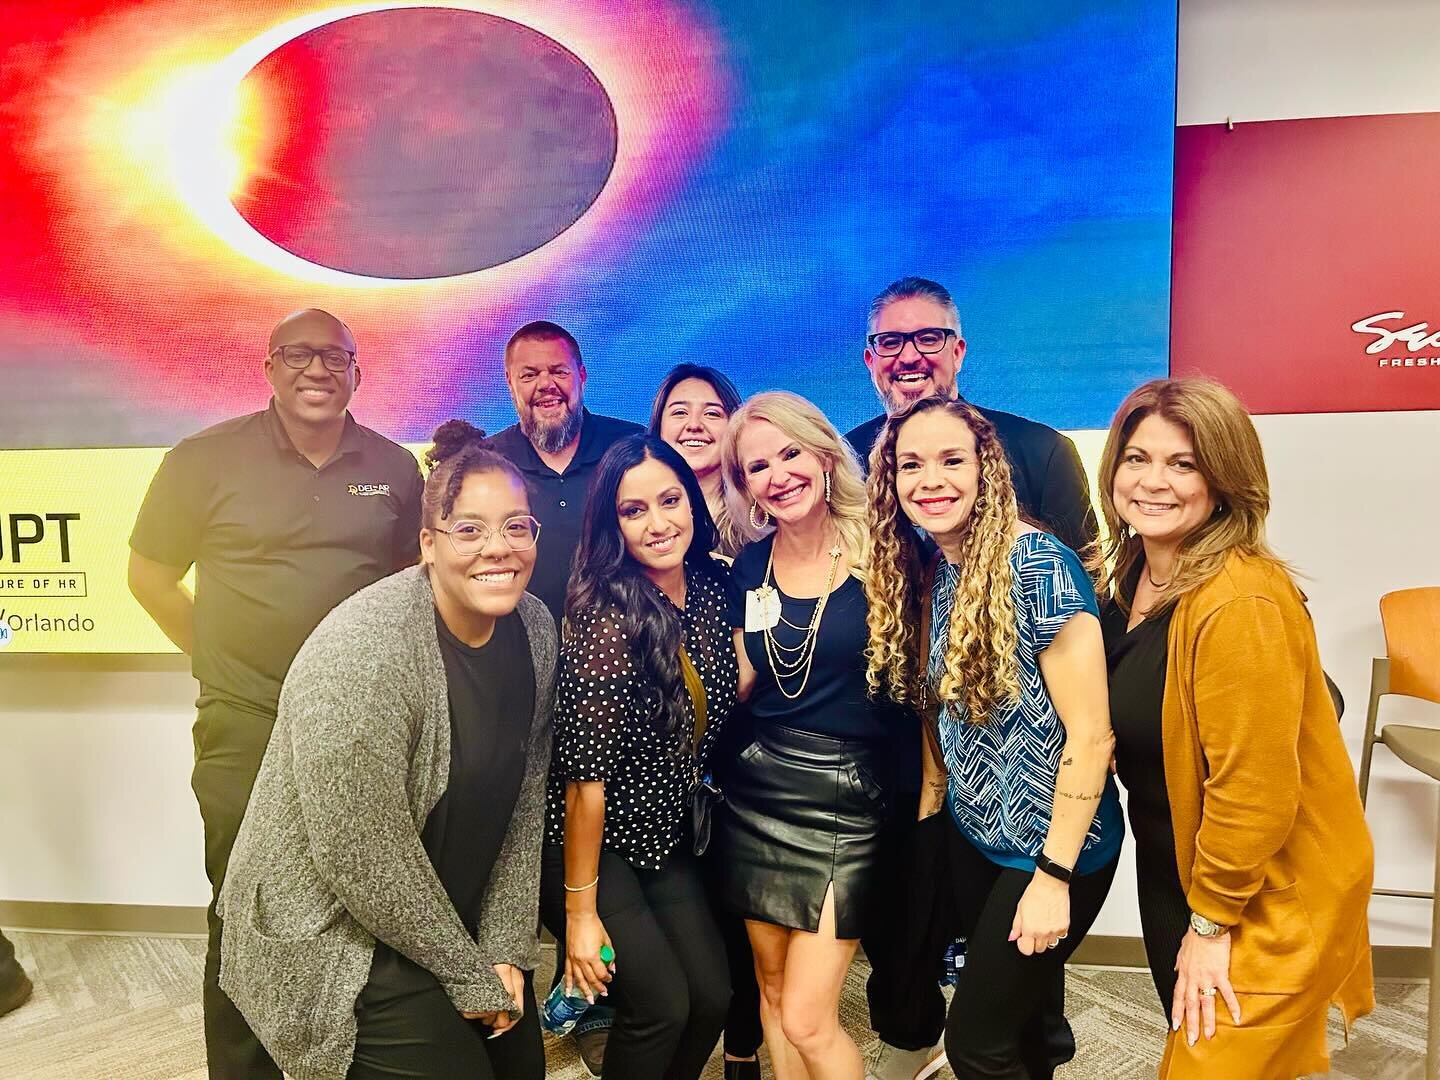 Better late than never! We had a BLAST at DisruptHR Orlando 16 last week! A HUGE thank you to Sarah King and Randy Babitt  from Darden Restaurants HQ for hosting us!

The energy was unreal and we just CANNOT wait until 17!

Stay tuned:) #hr #disrupth